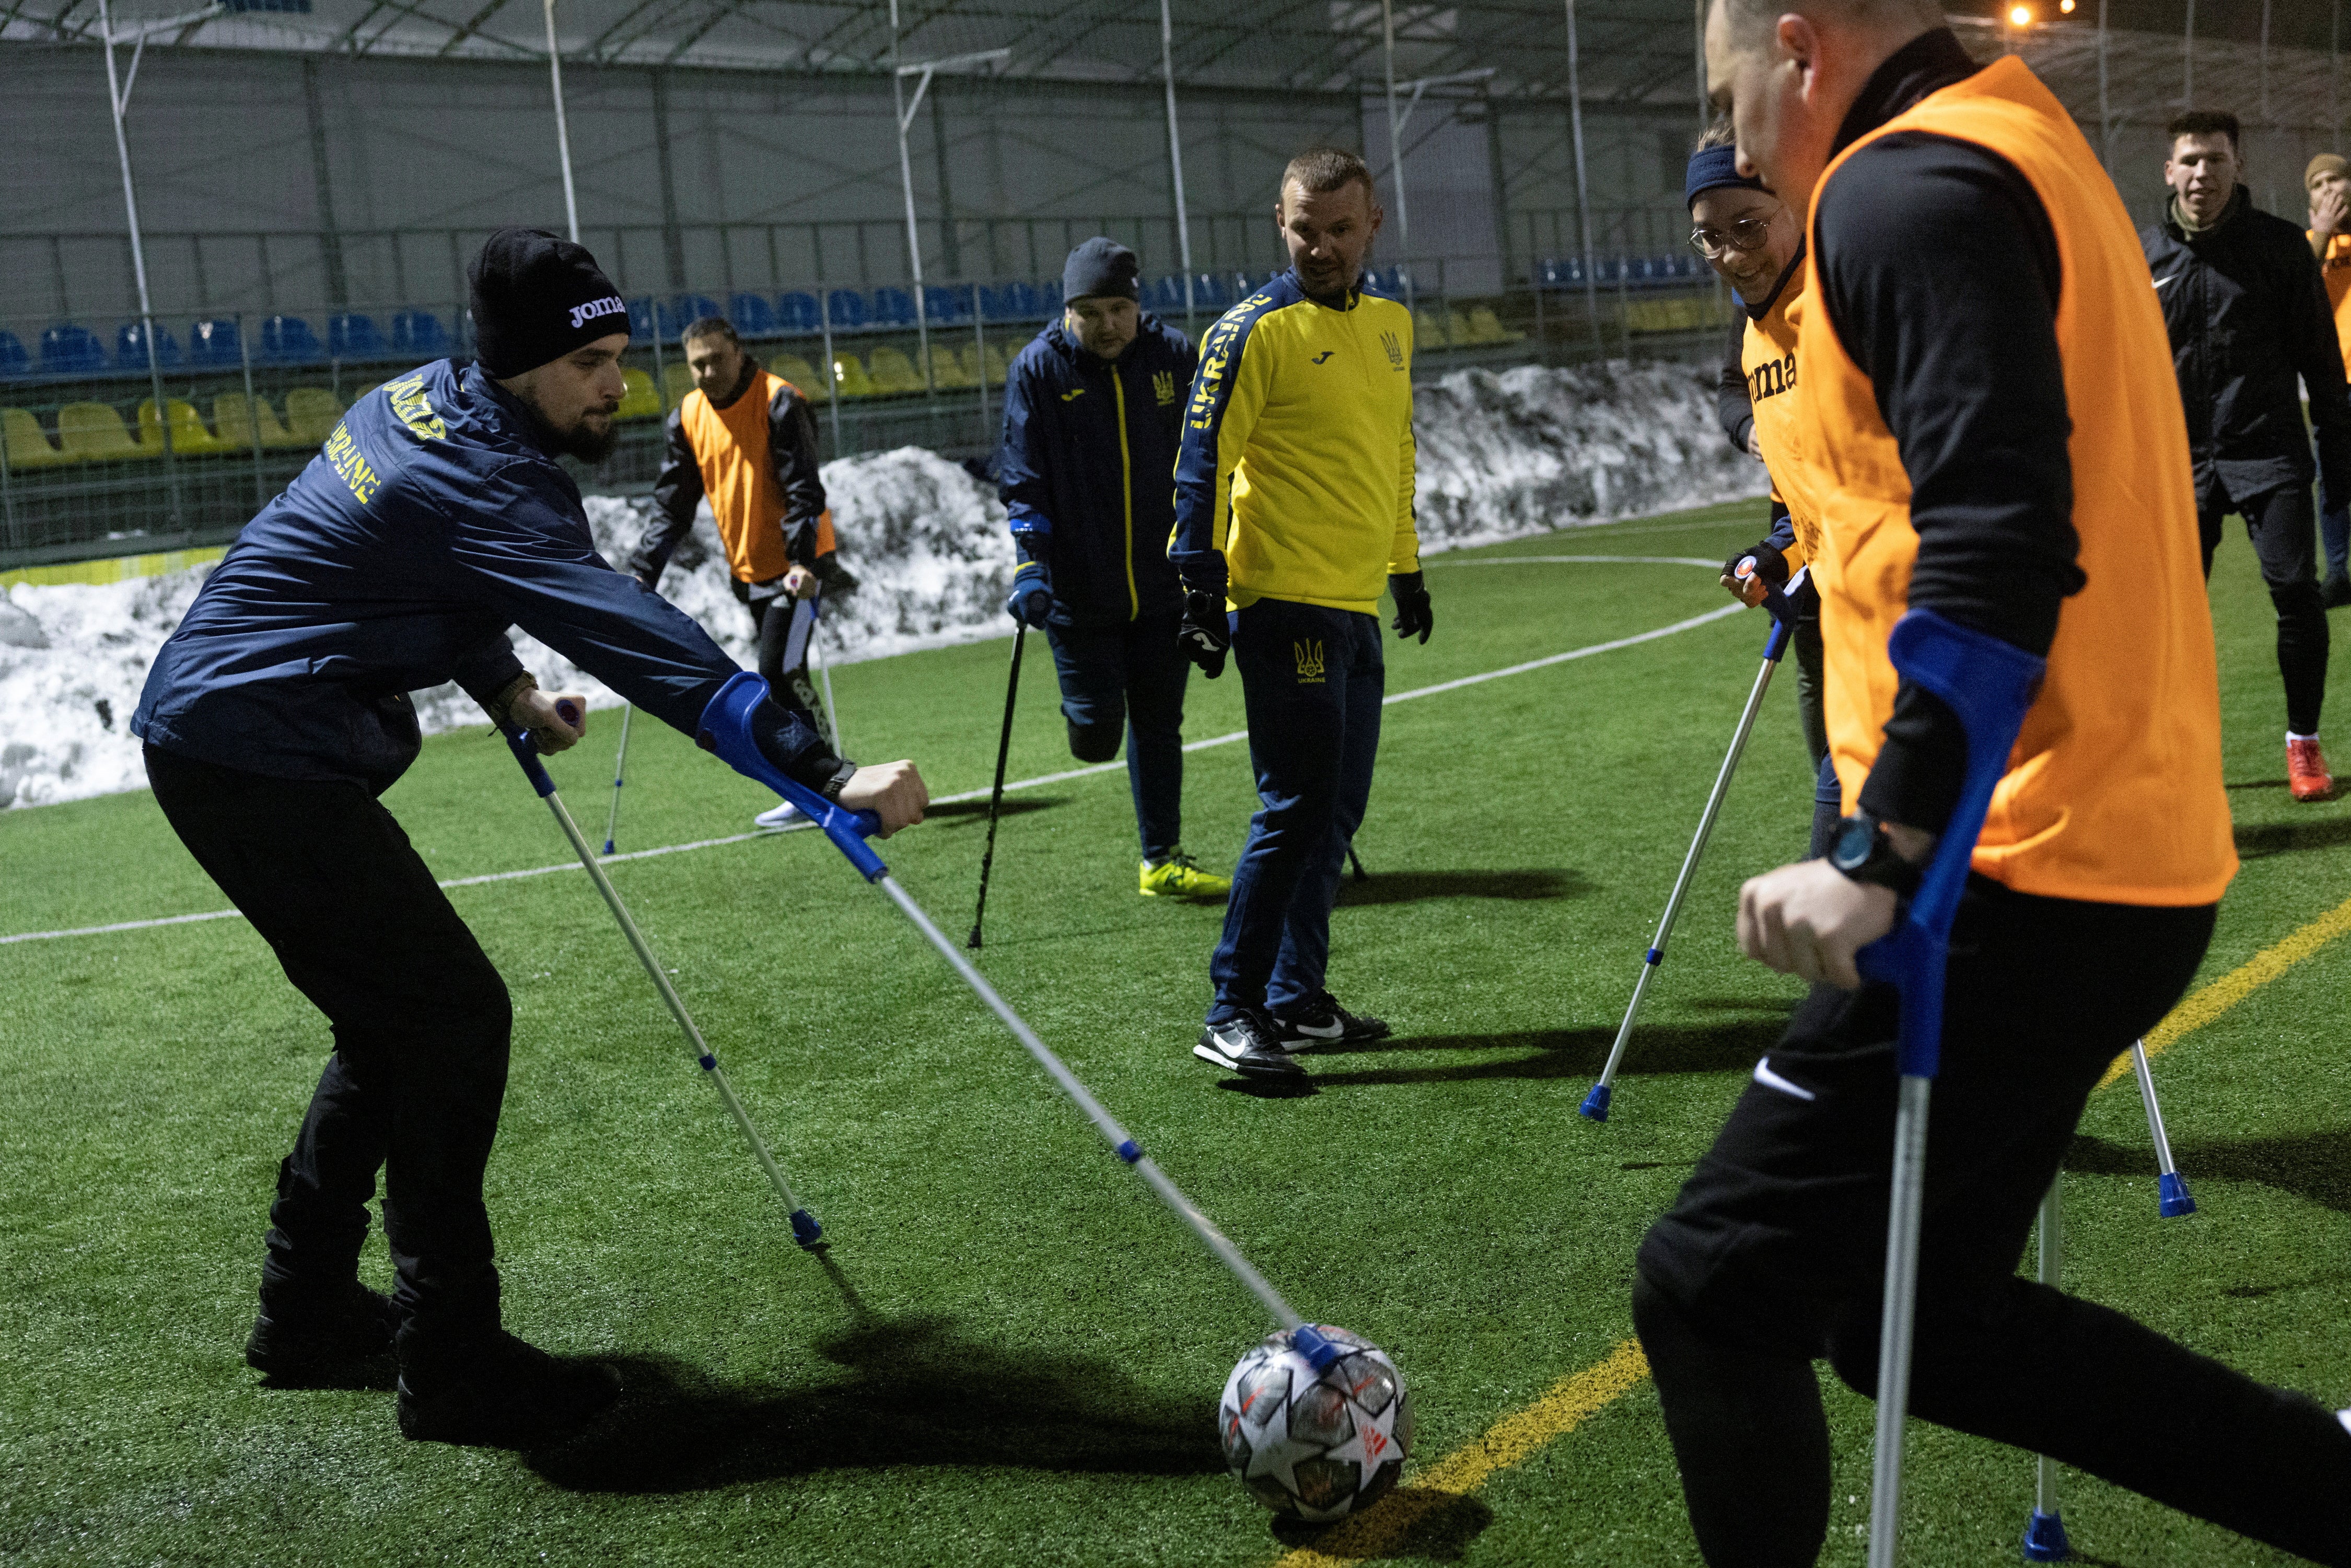 Rostyslav Prystupa, a Ukrainian marine who was injured in the spine while defending Mariupol, plays football with the inclusive team Ukrainian Football Association